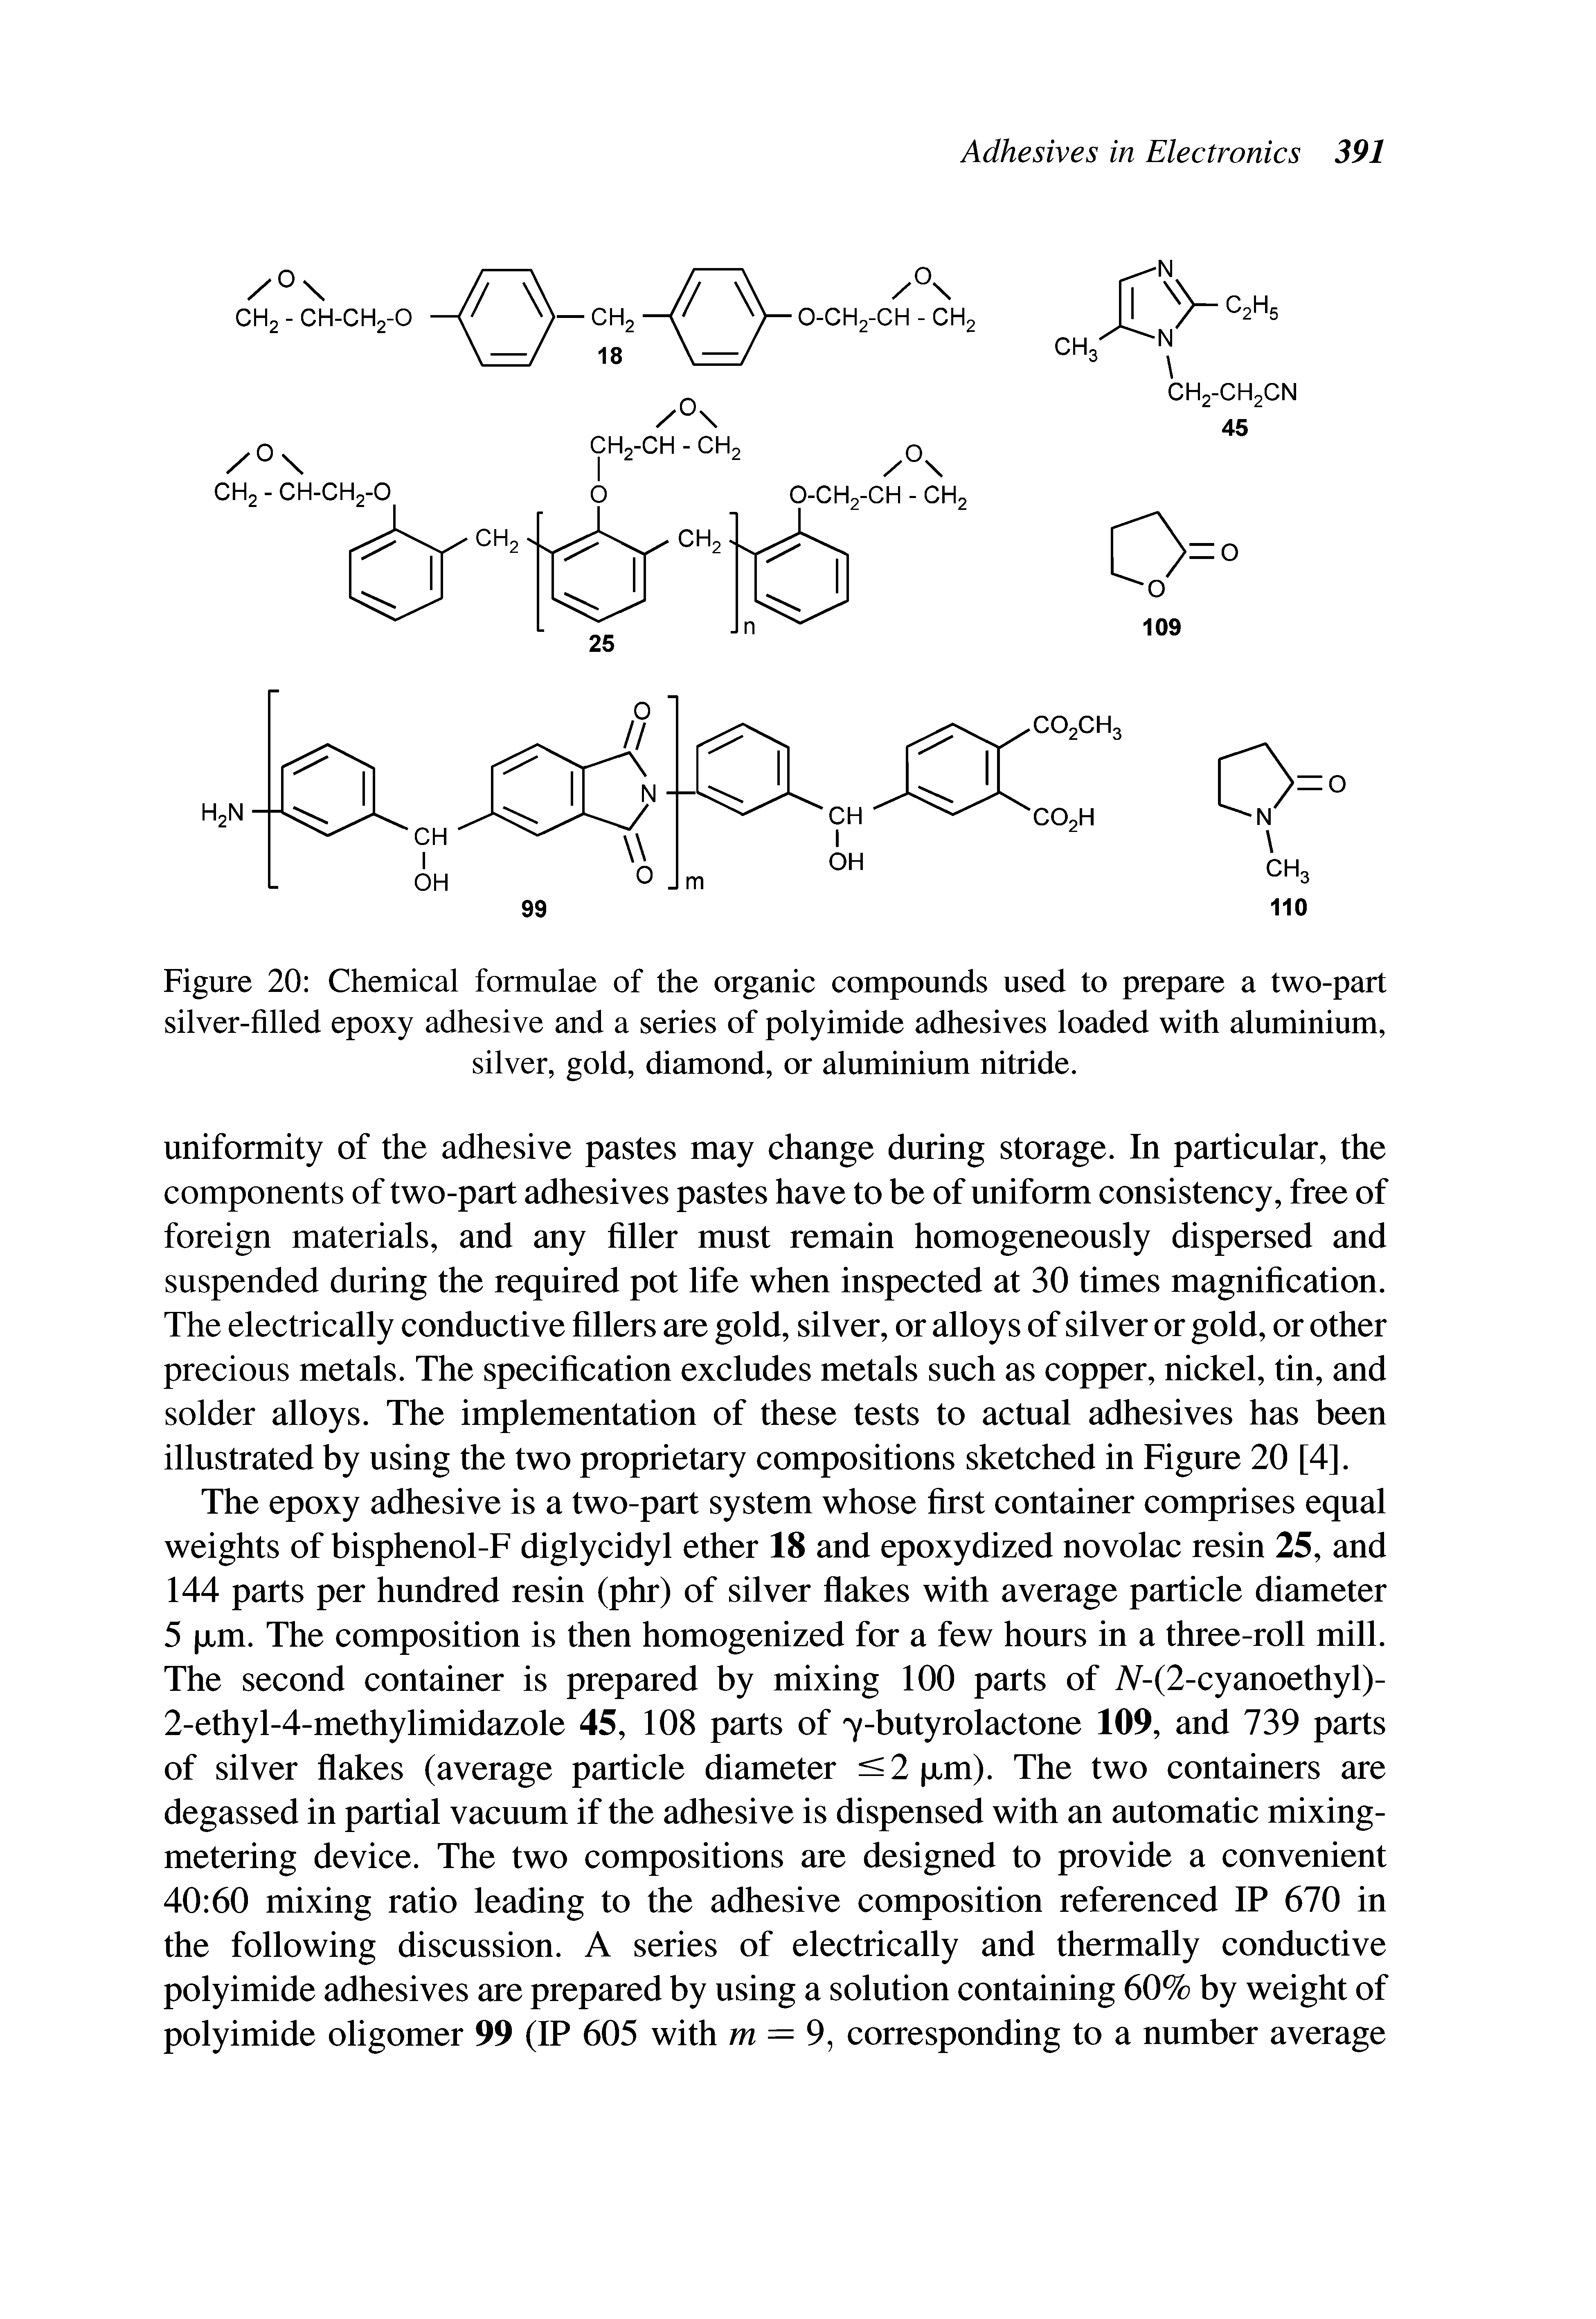 Figure 20 Chemical formulae of the organic compounds used to prepare a two-part silver-filled epoxy adhesive and a series of polyimide adhesives loaded with aluminium, silver, gold, diamond, or aluminium nitride.